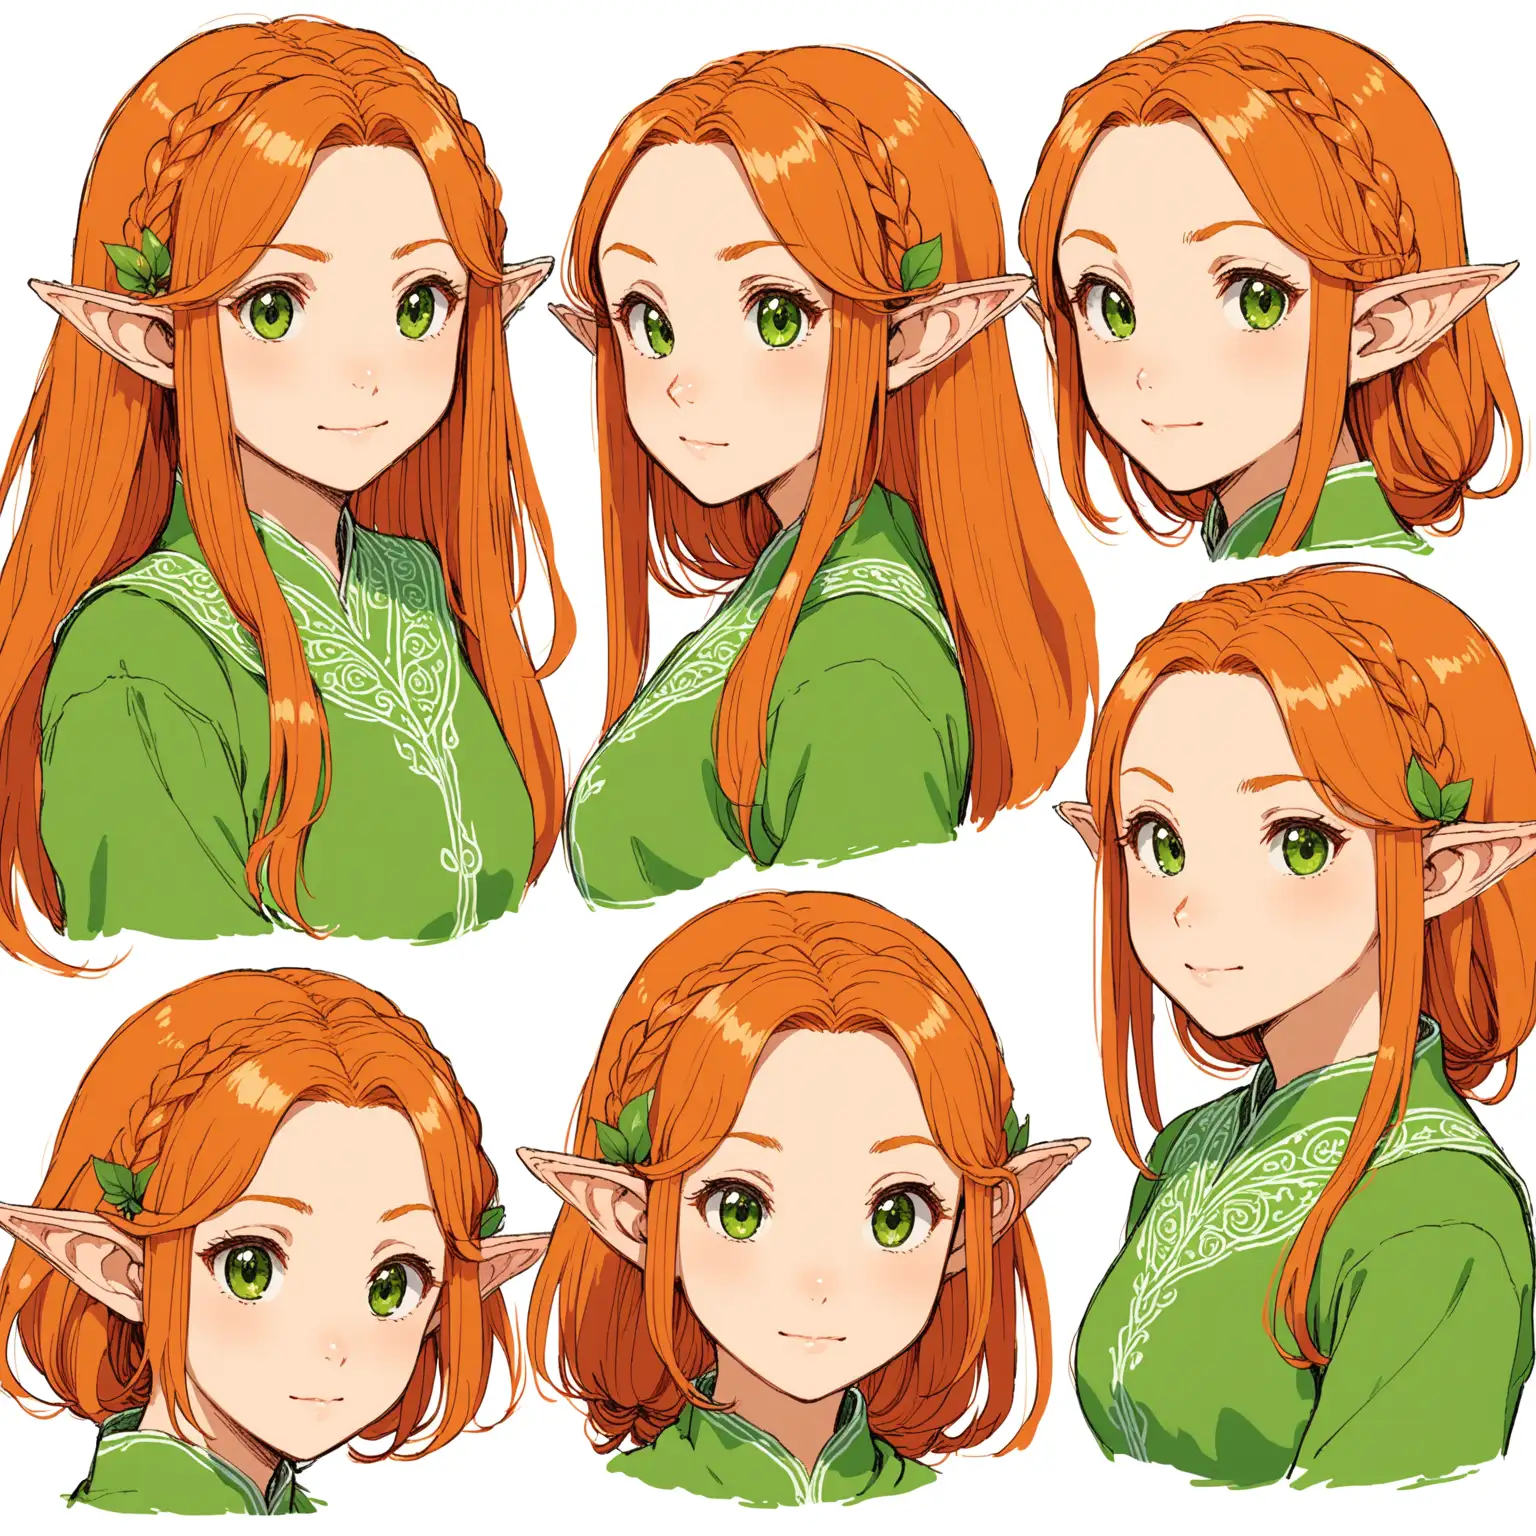 Elven GingerHaired Beauties Inspired by Ghibli